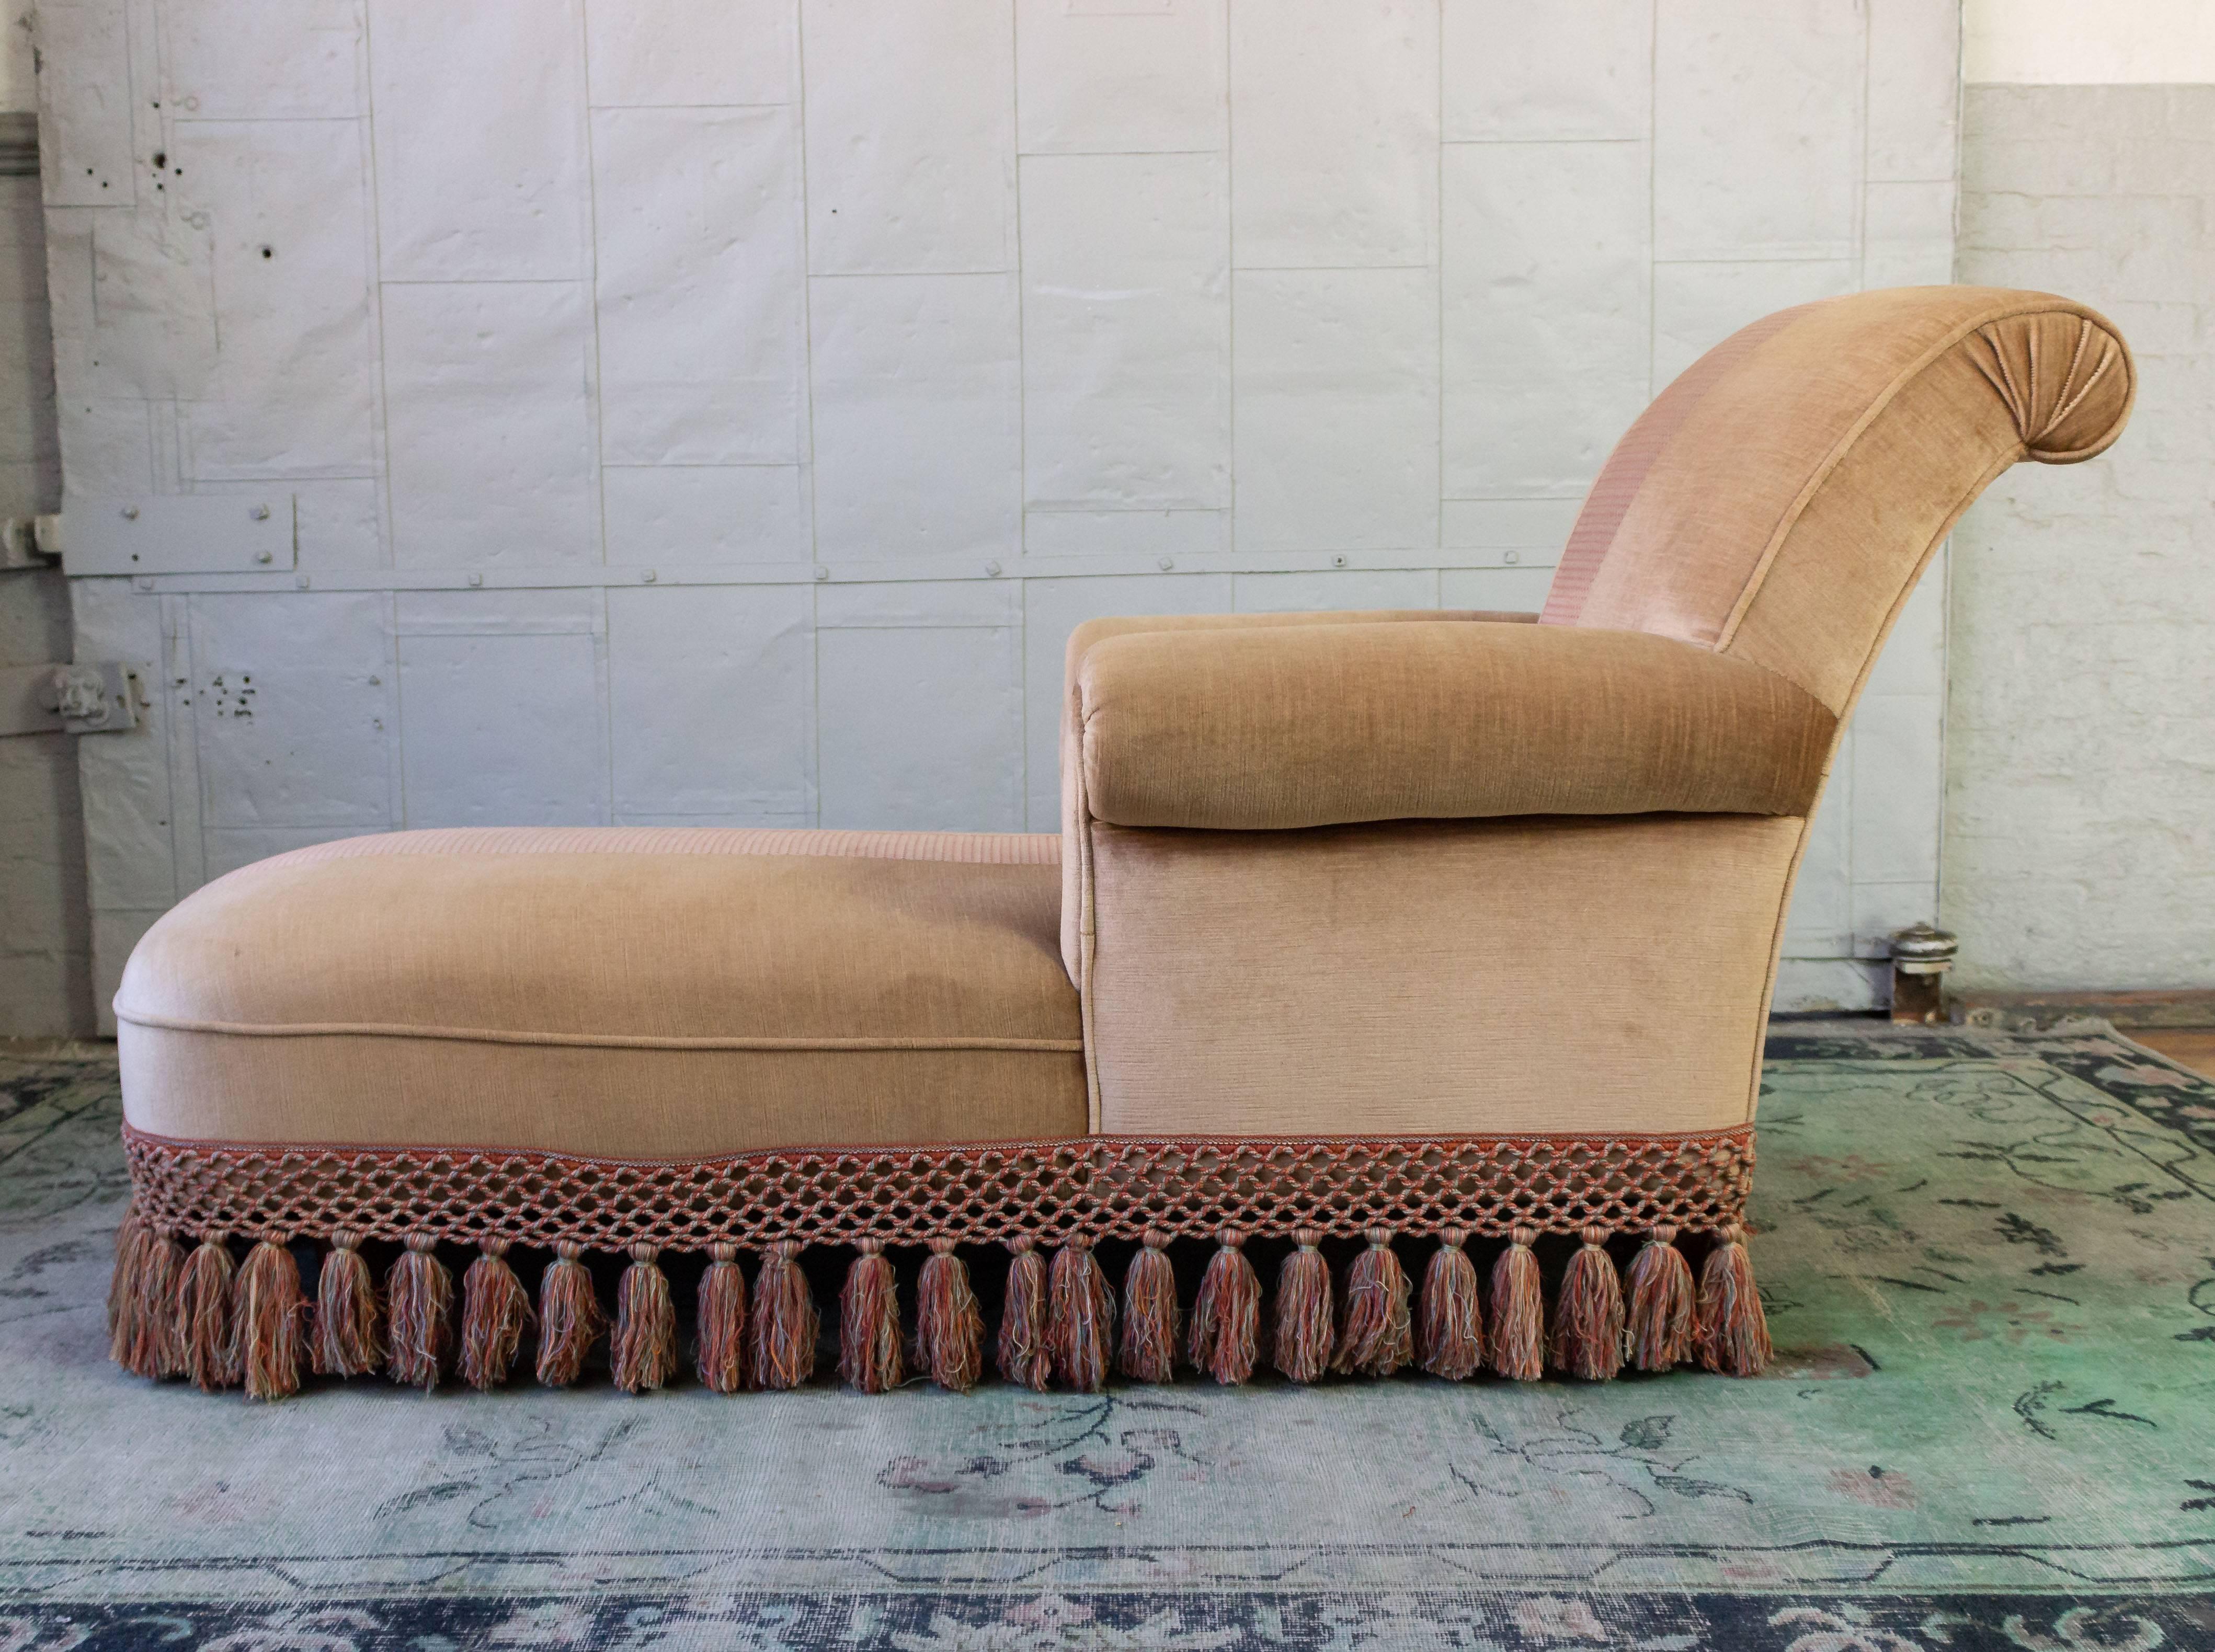 Chaise Longue With Contrasting Fabric and Trim 2